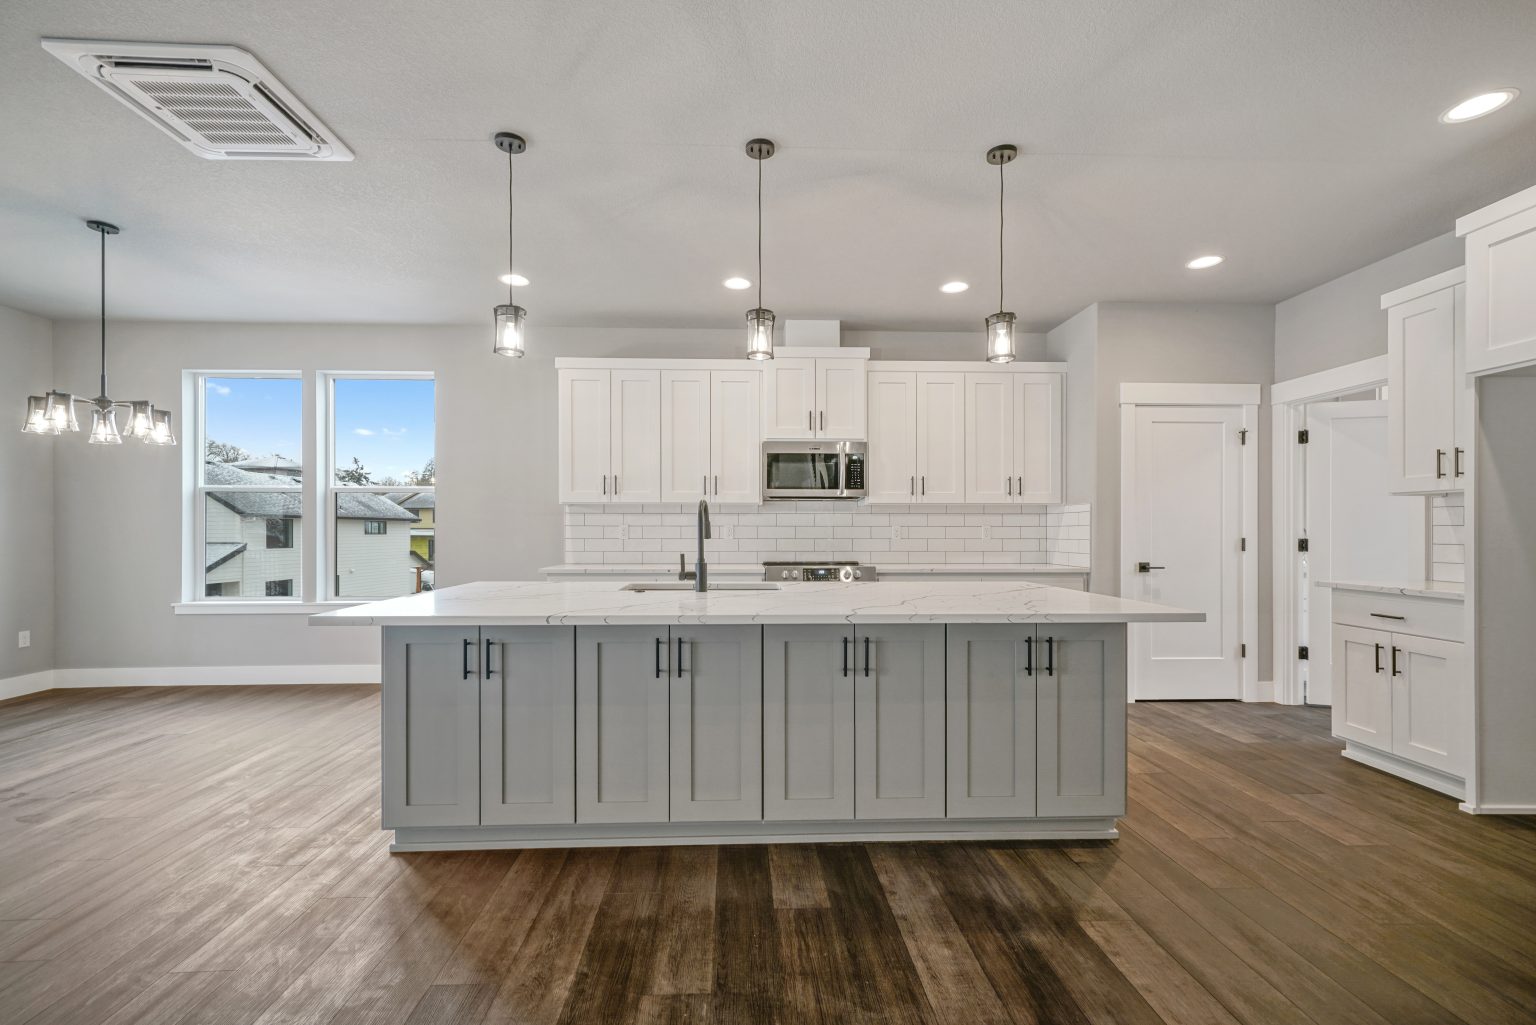 Spacious kitchen with island, white backsplash, white cupboards and doors, stainless steel appliances